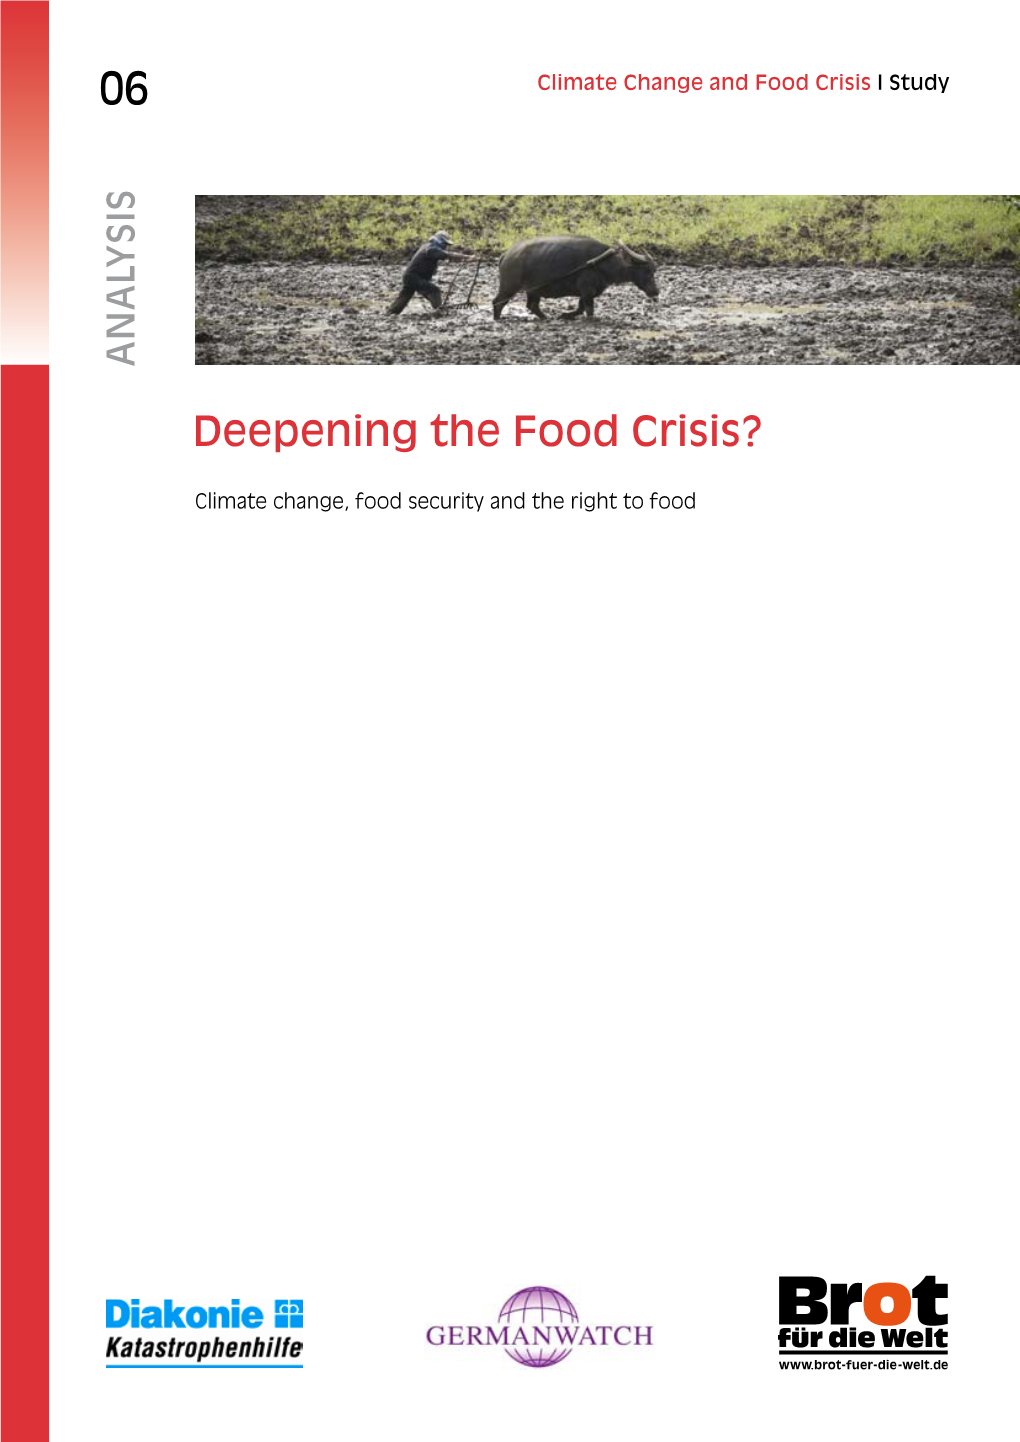 Deepening the Food Crisis? a Summary of the Study 'Climate Change, Food Security and the Right to Adequate Food'